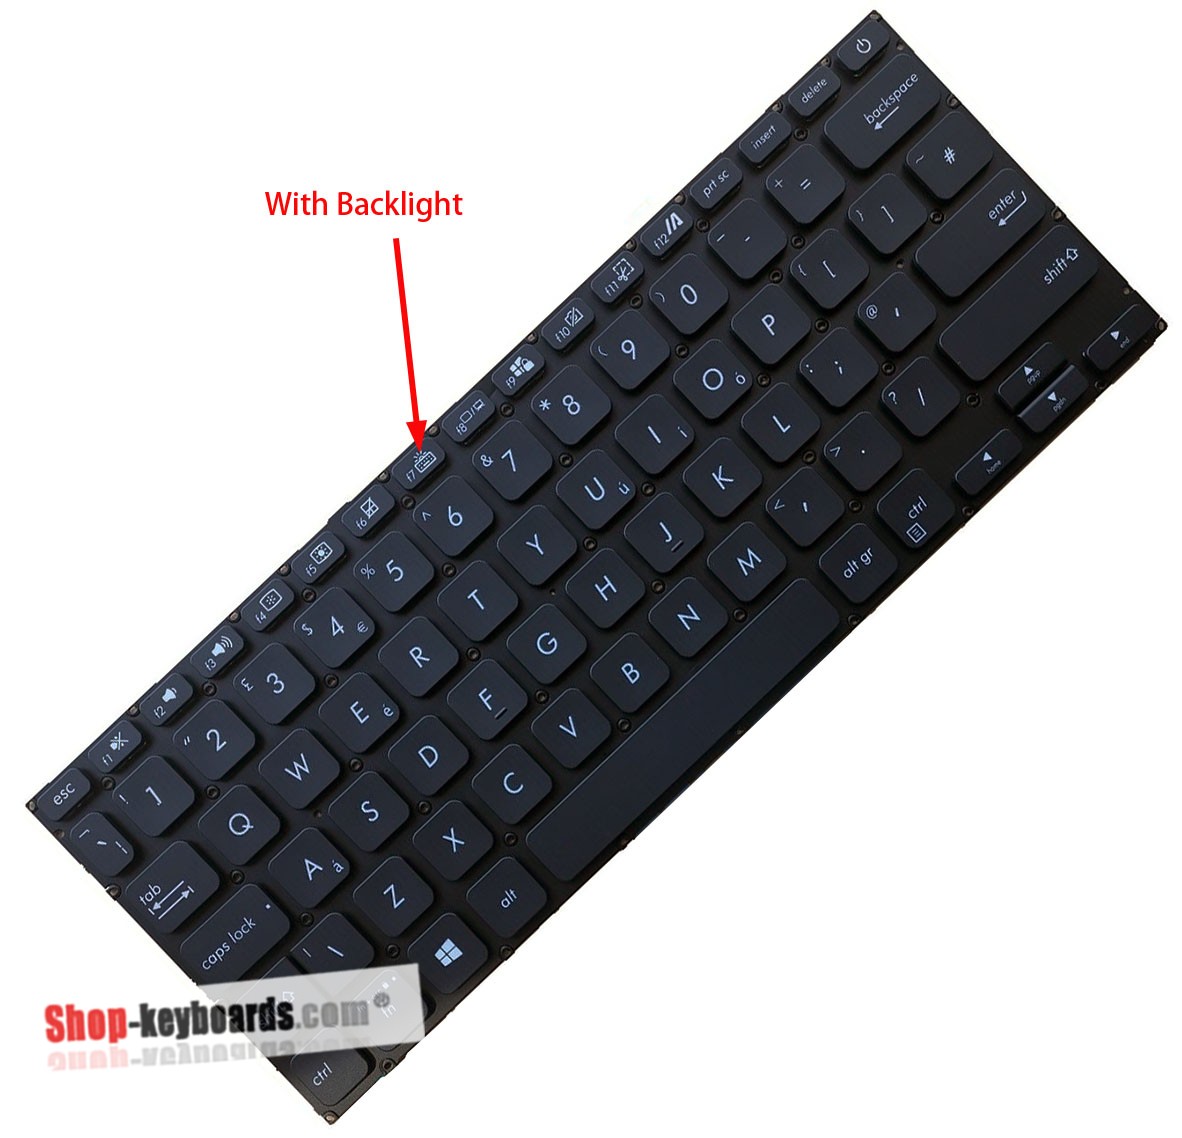 Asus 0KNB0-2105US00 Keyboard replacement